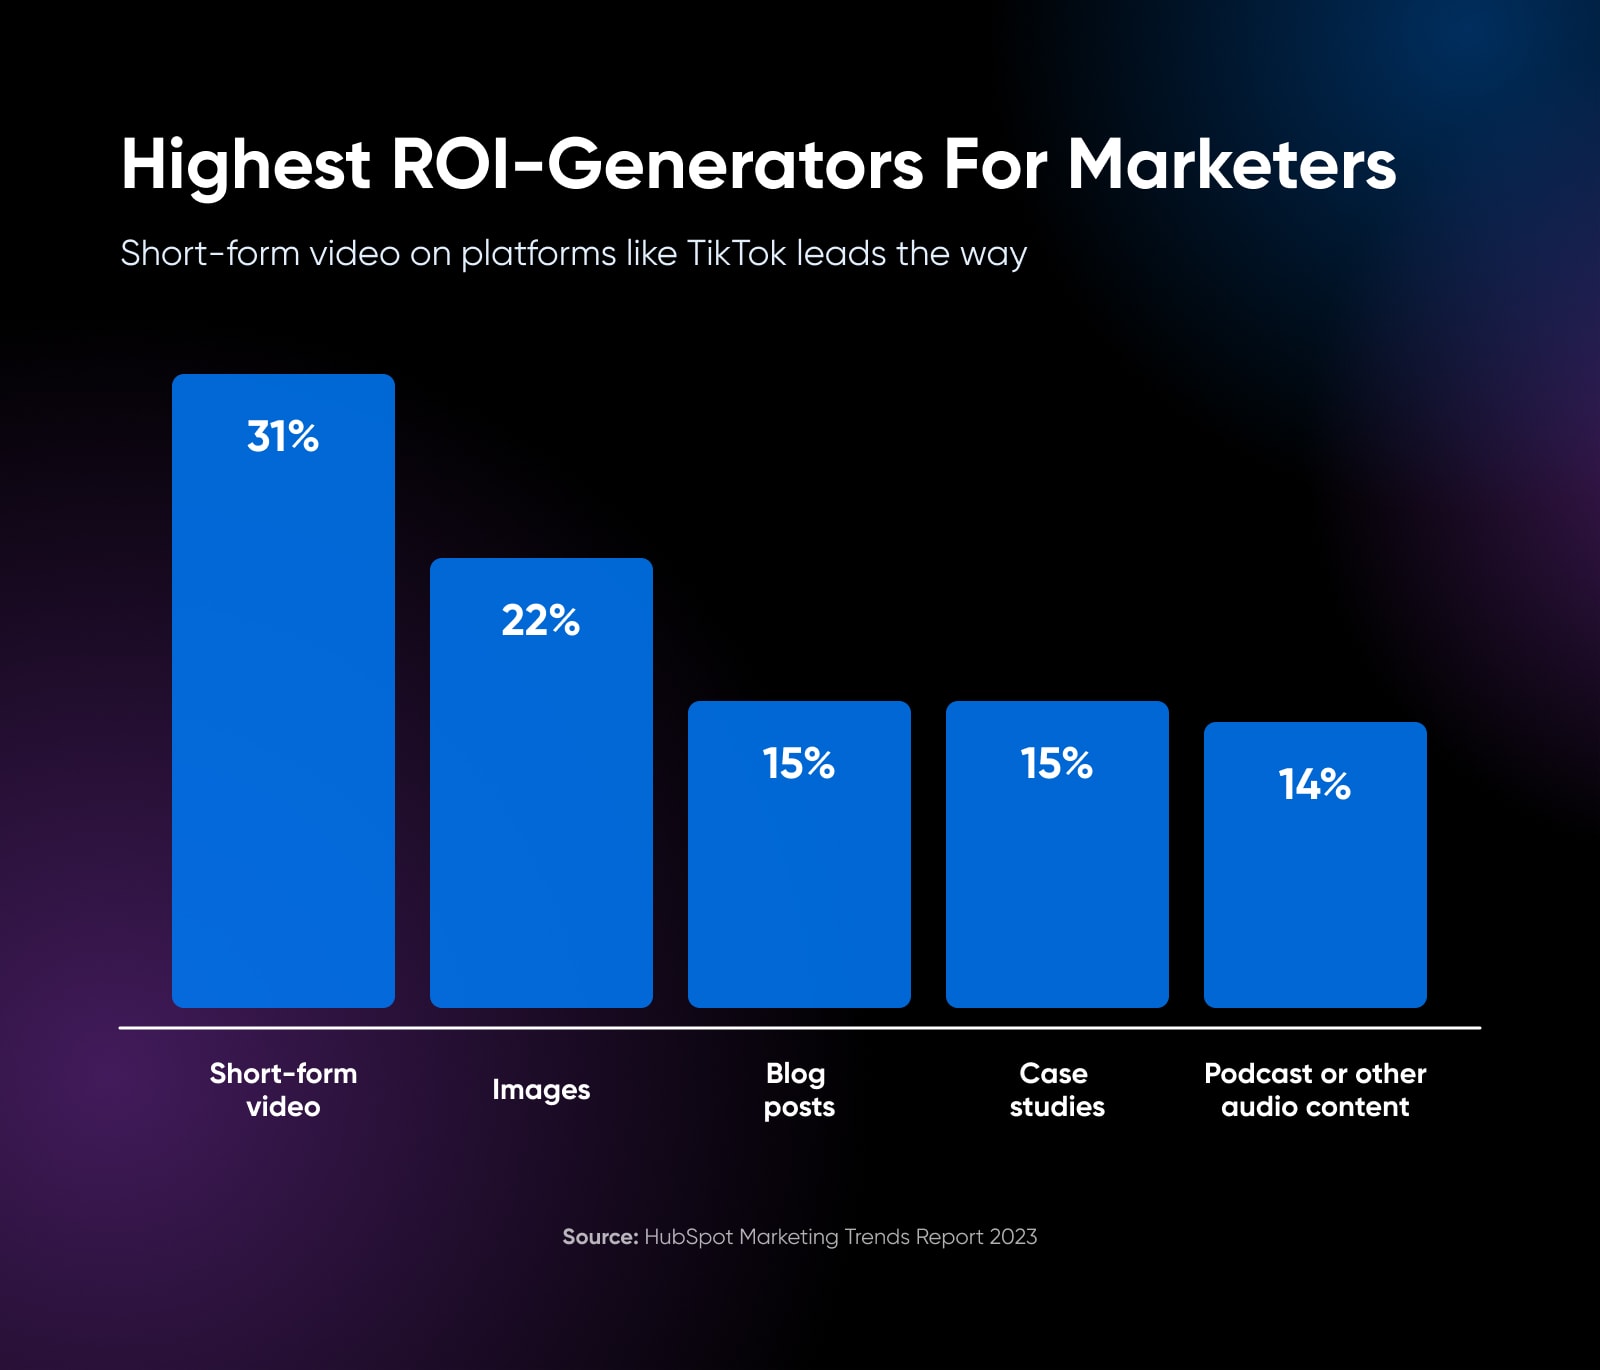 highest ROI-generators for marketers show short-form video at 31% (the highest) down to podcast and other audio at 14% (the lowest) 